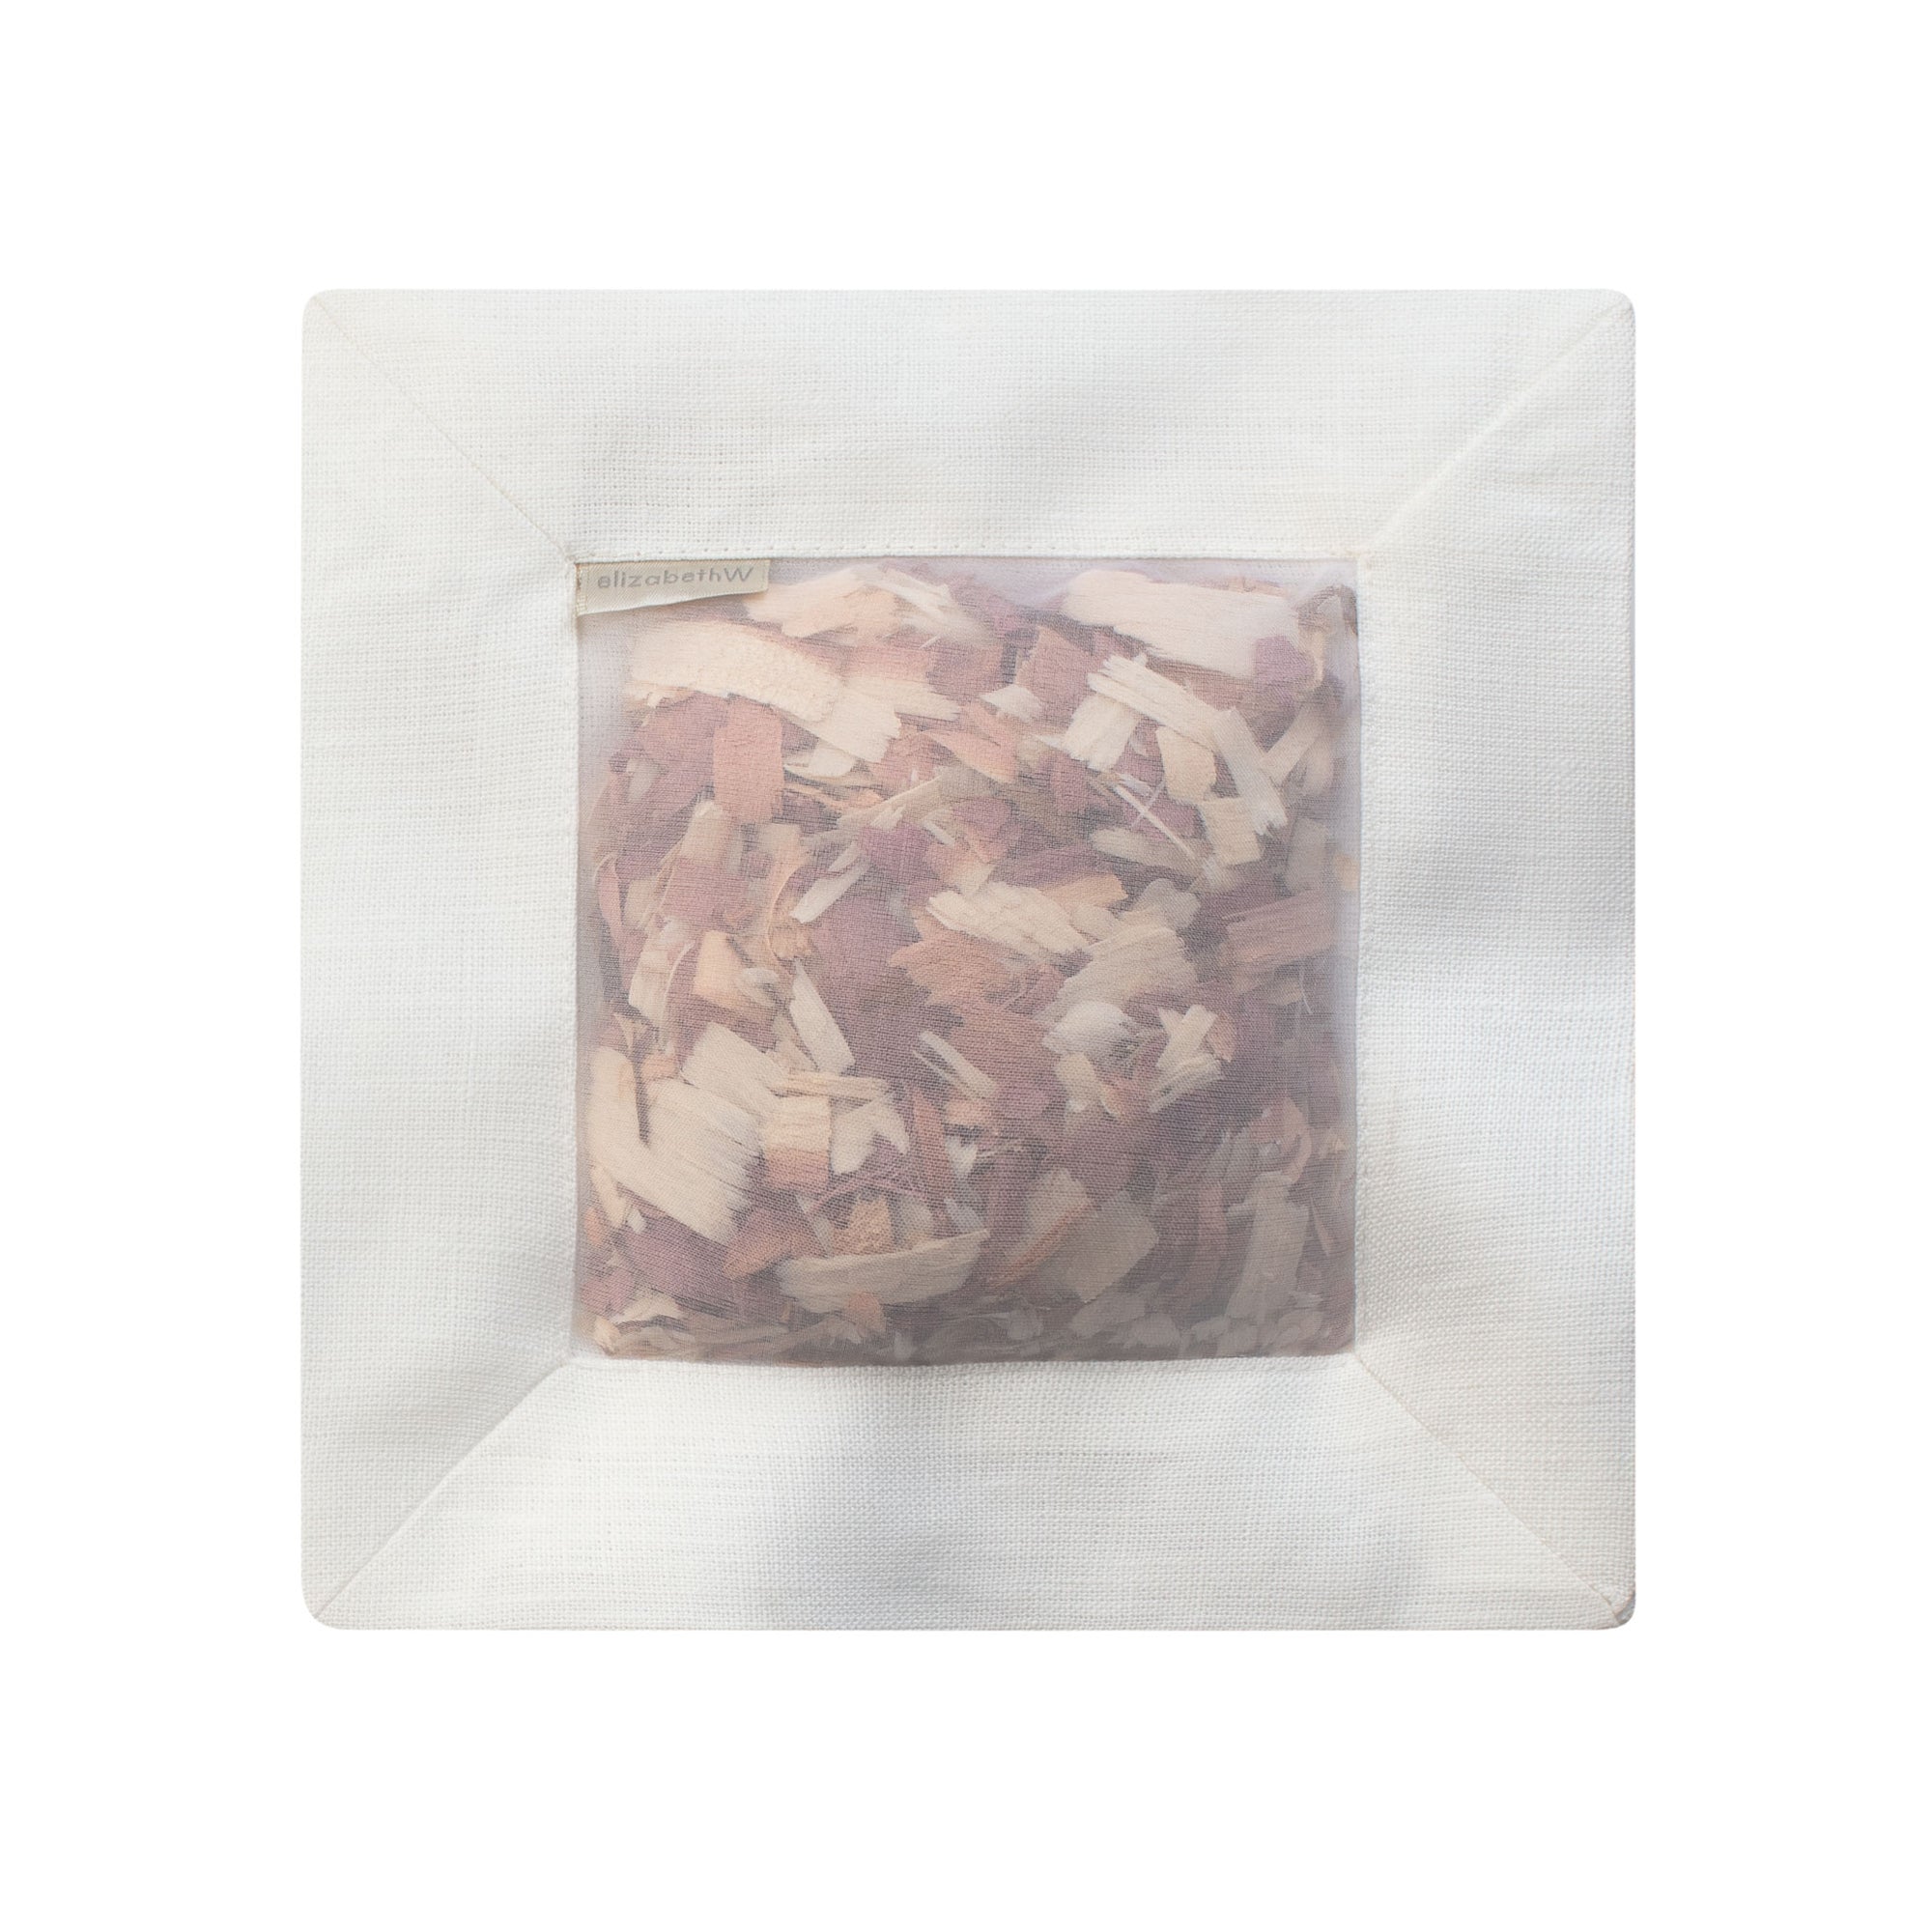 Cedar filled inside of an ivory colored square sachet with a transparent screen